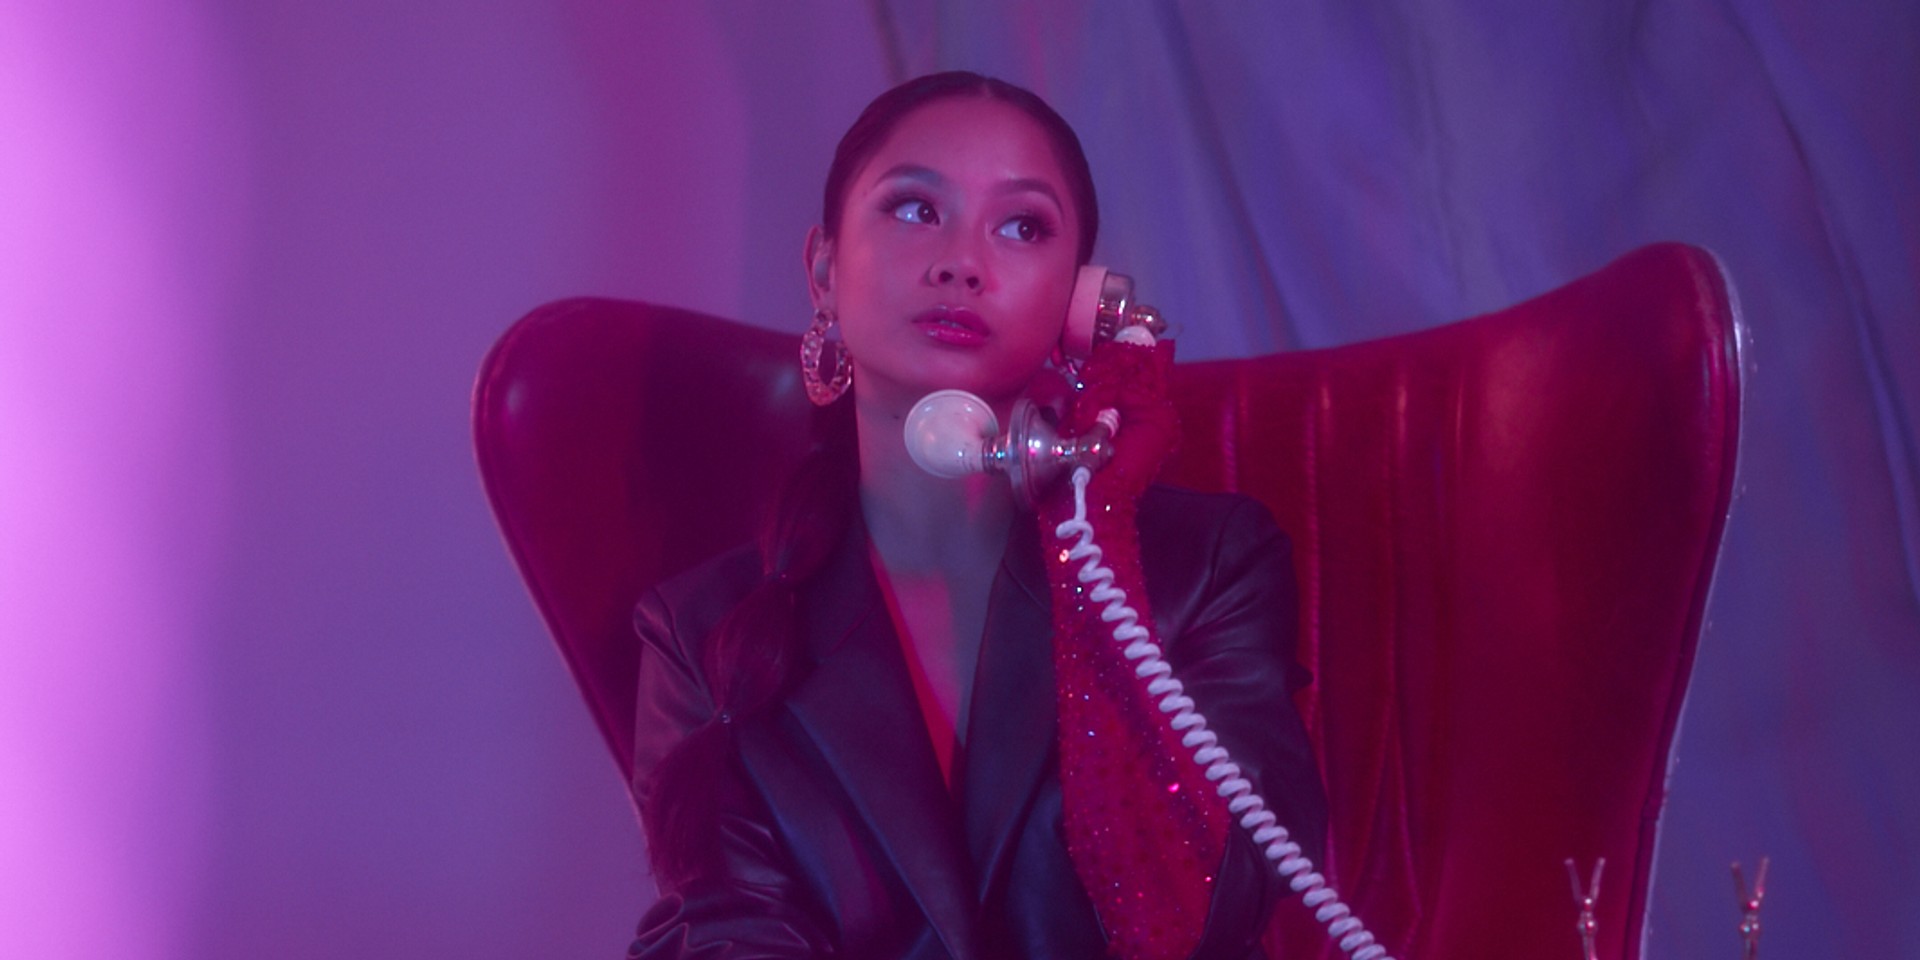 Ylona Garcia on growing up in the spotlight, dealing with the lockdown, and joining PARADISE RISING